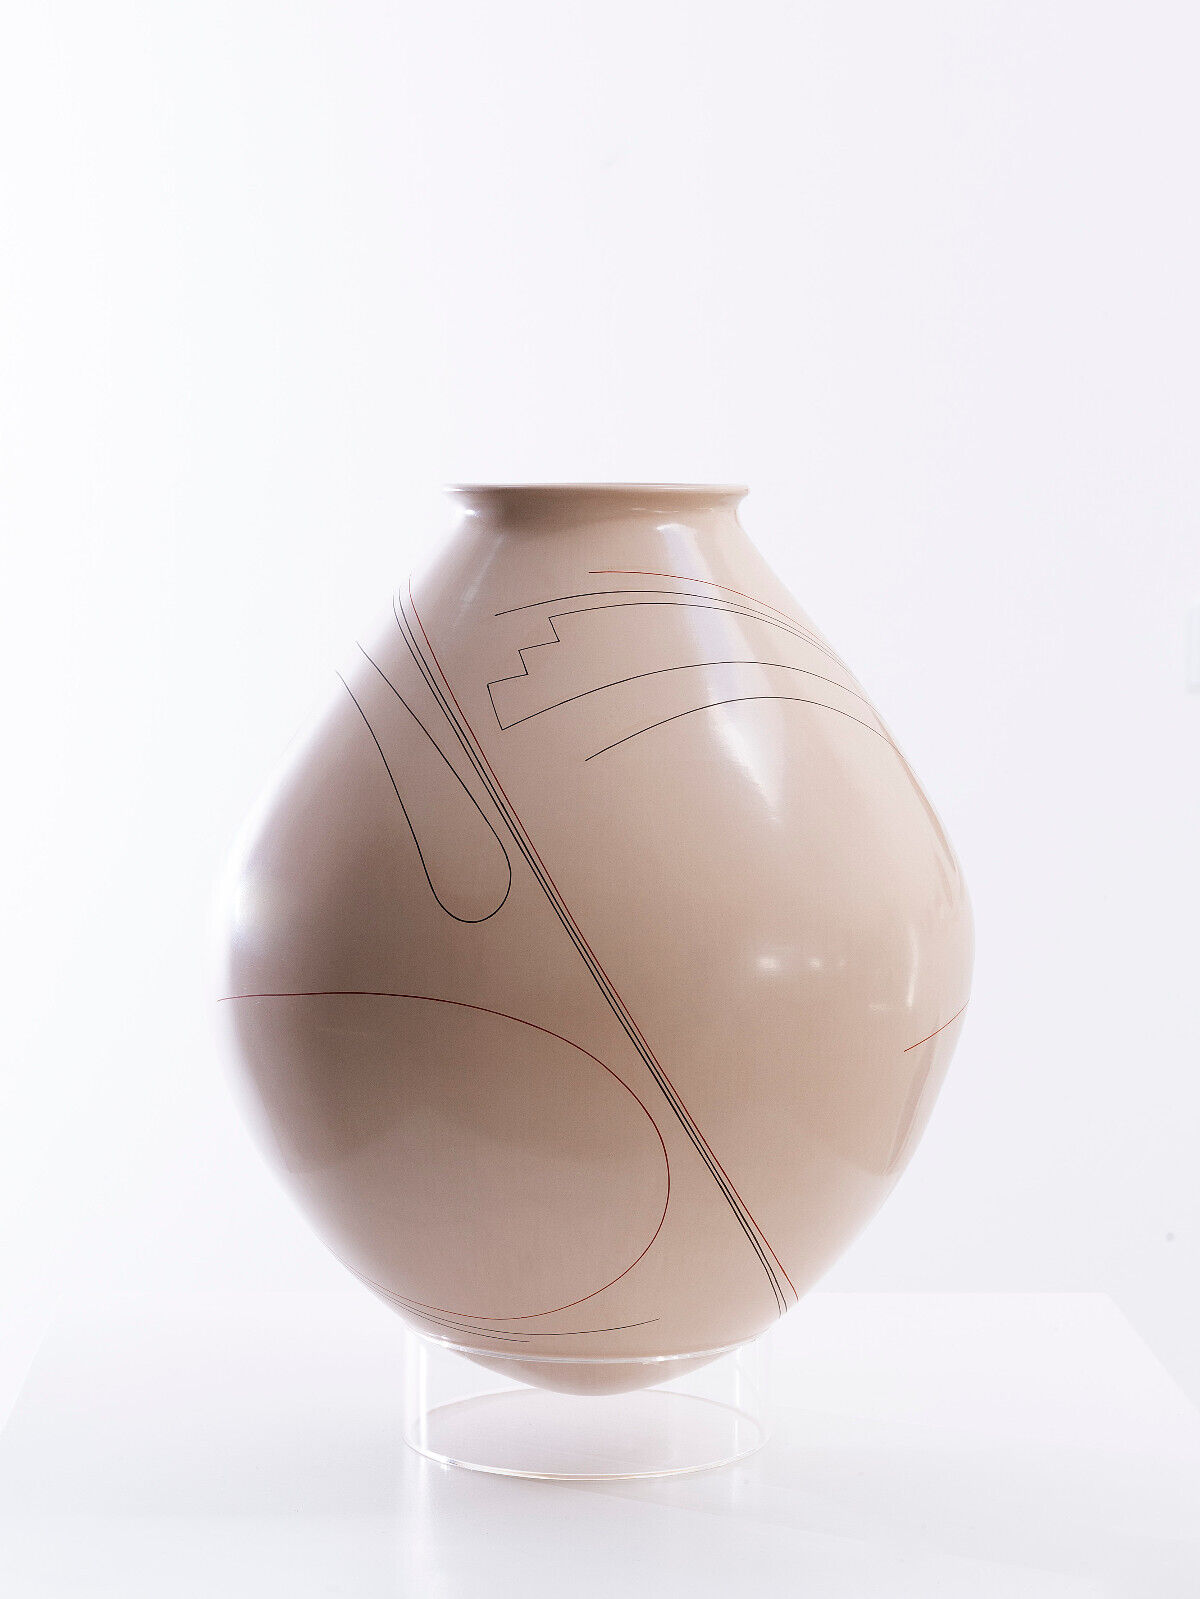 Mata Ortiz Pottery | As long as I keep moving | 16 in. | Mexican ceramic art